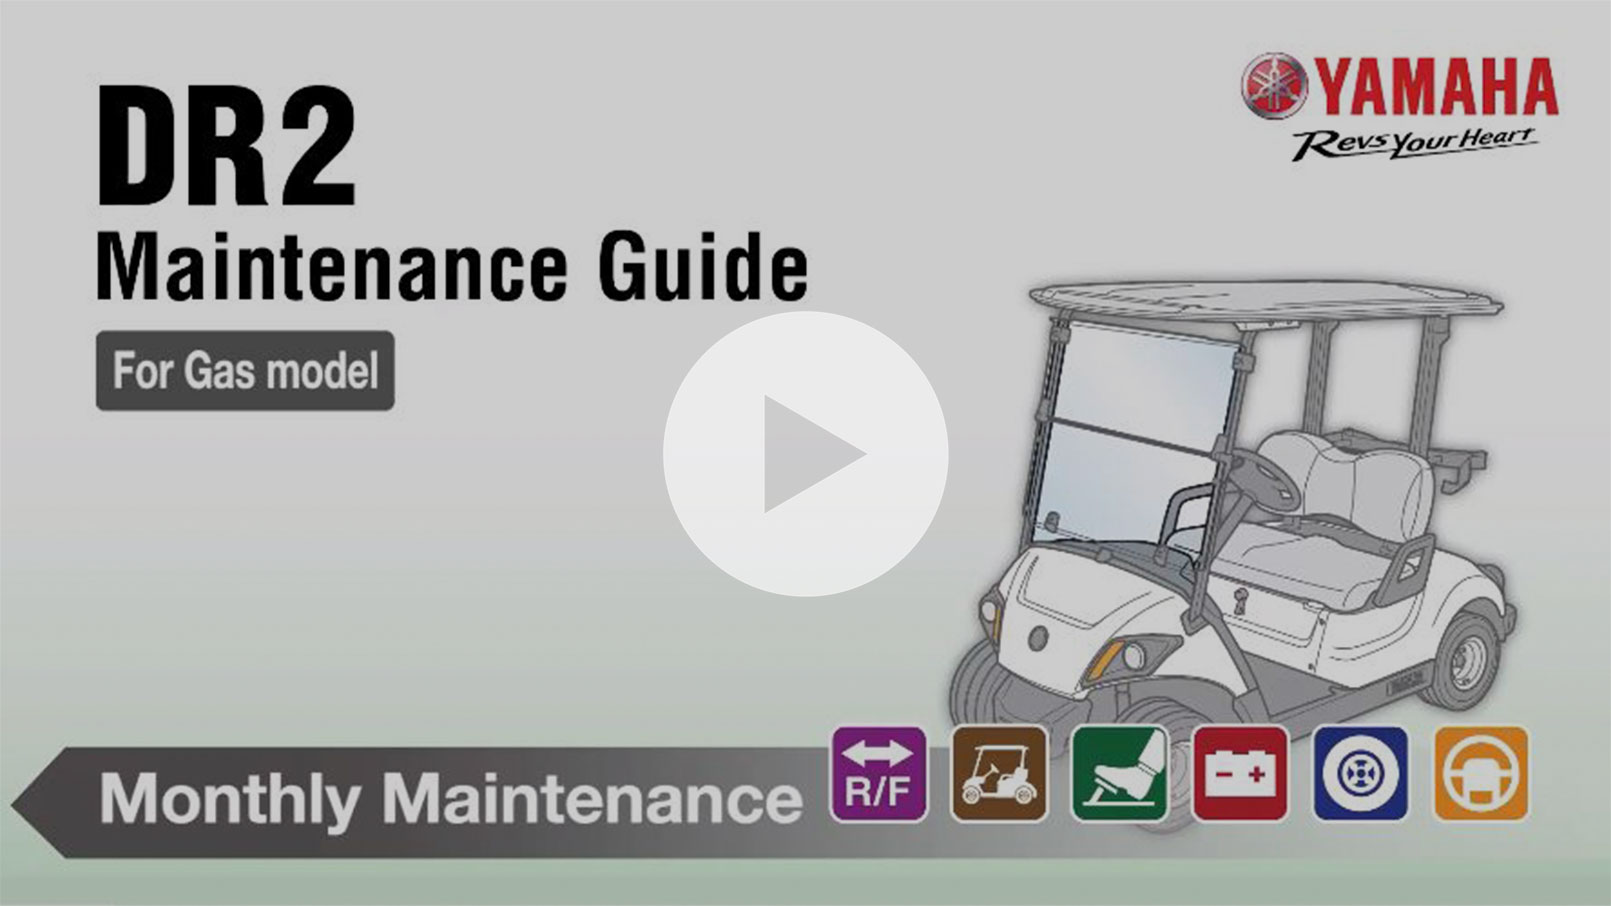 DR2 Maintenance Guide For Gas model Monthly Maintenance